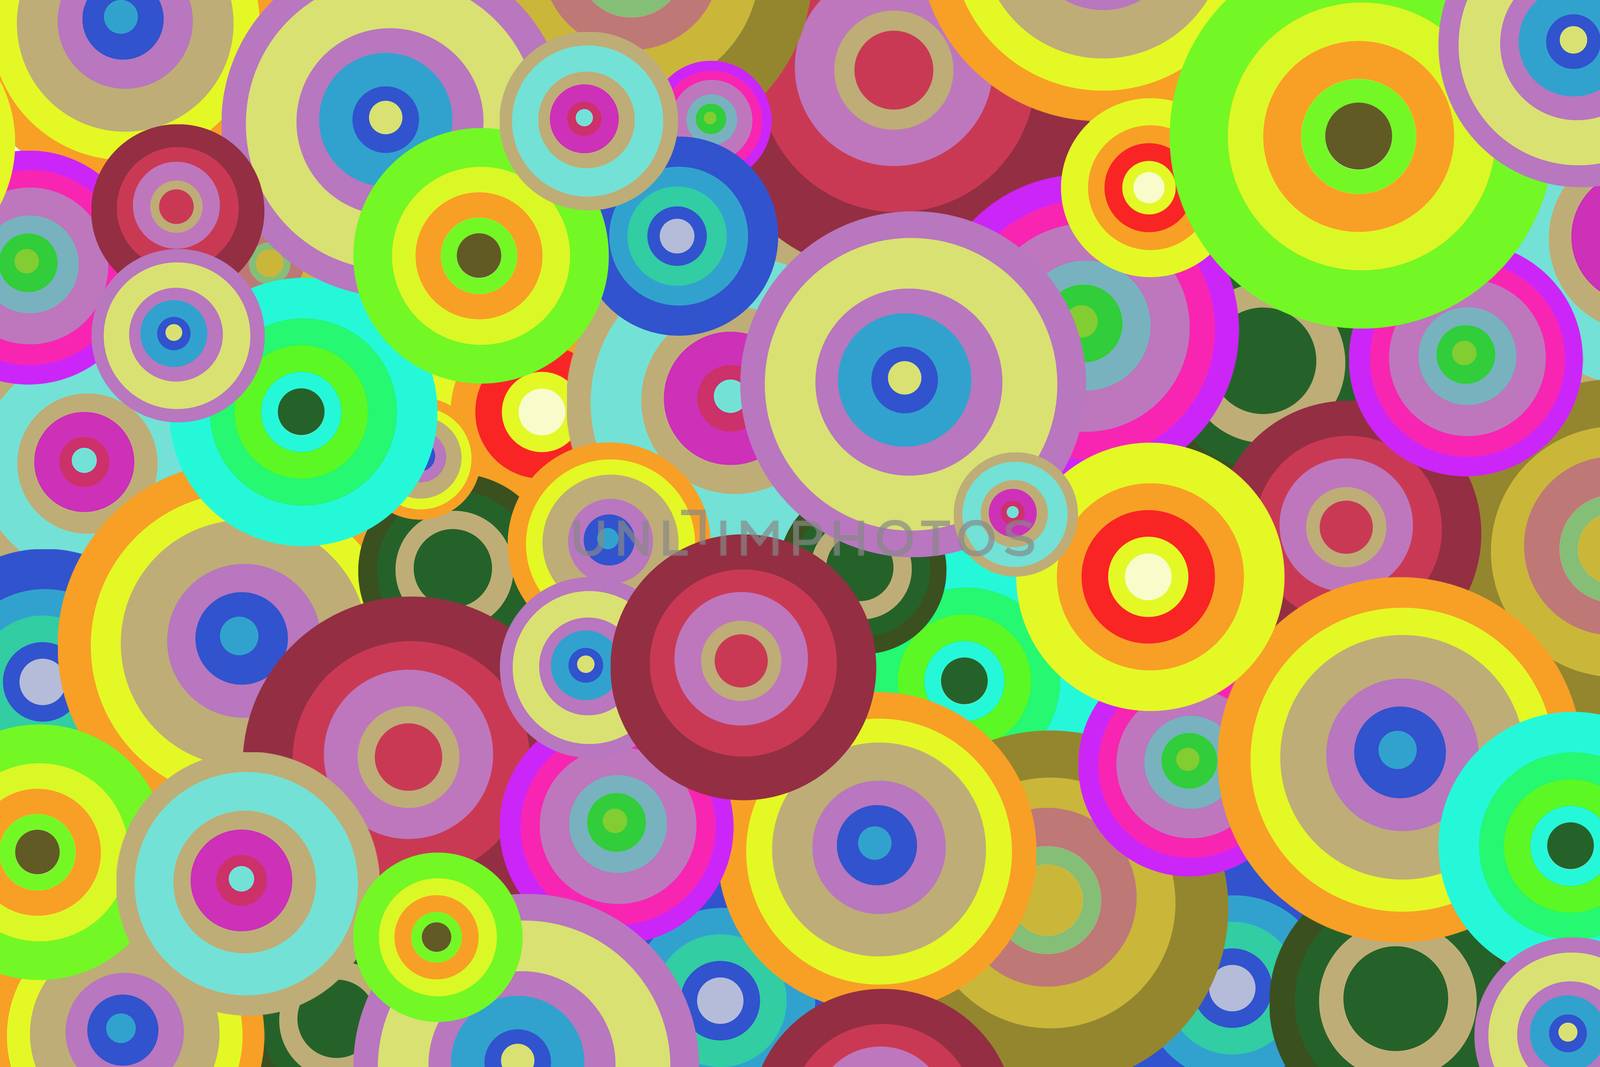 Bright geometric abstract background of colored circles for design